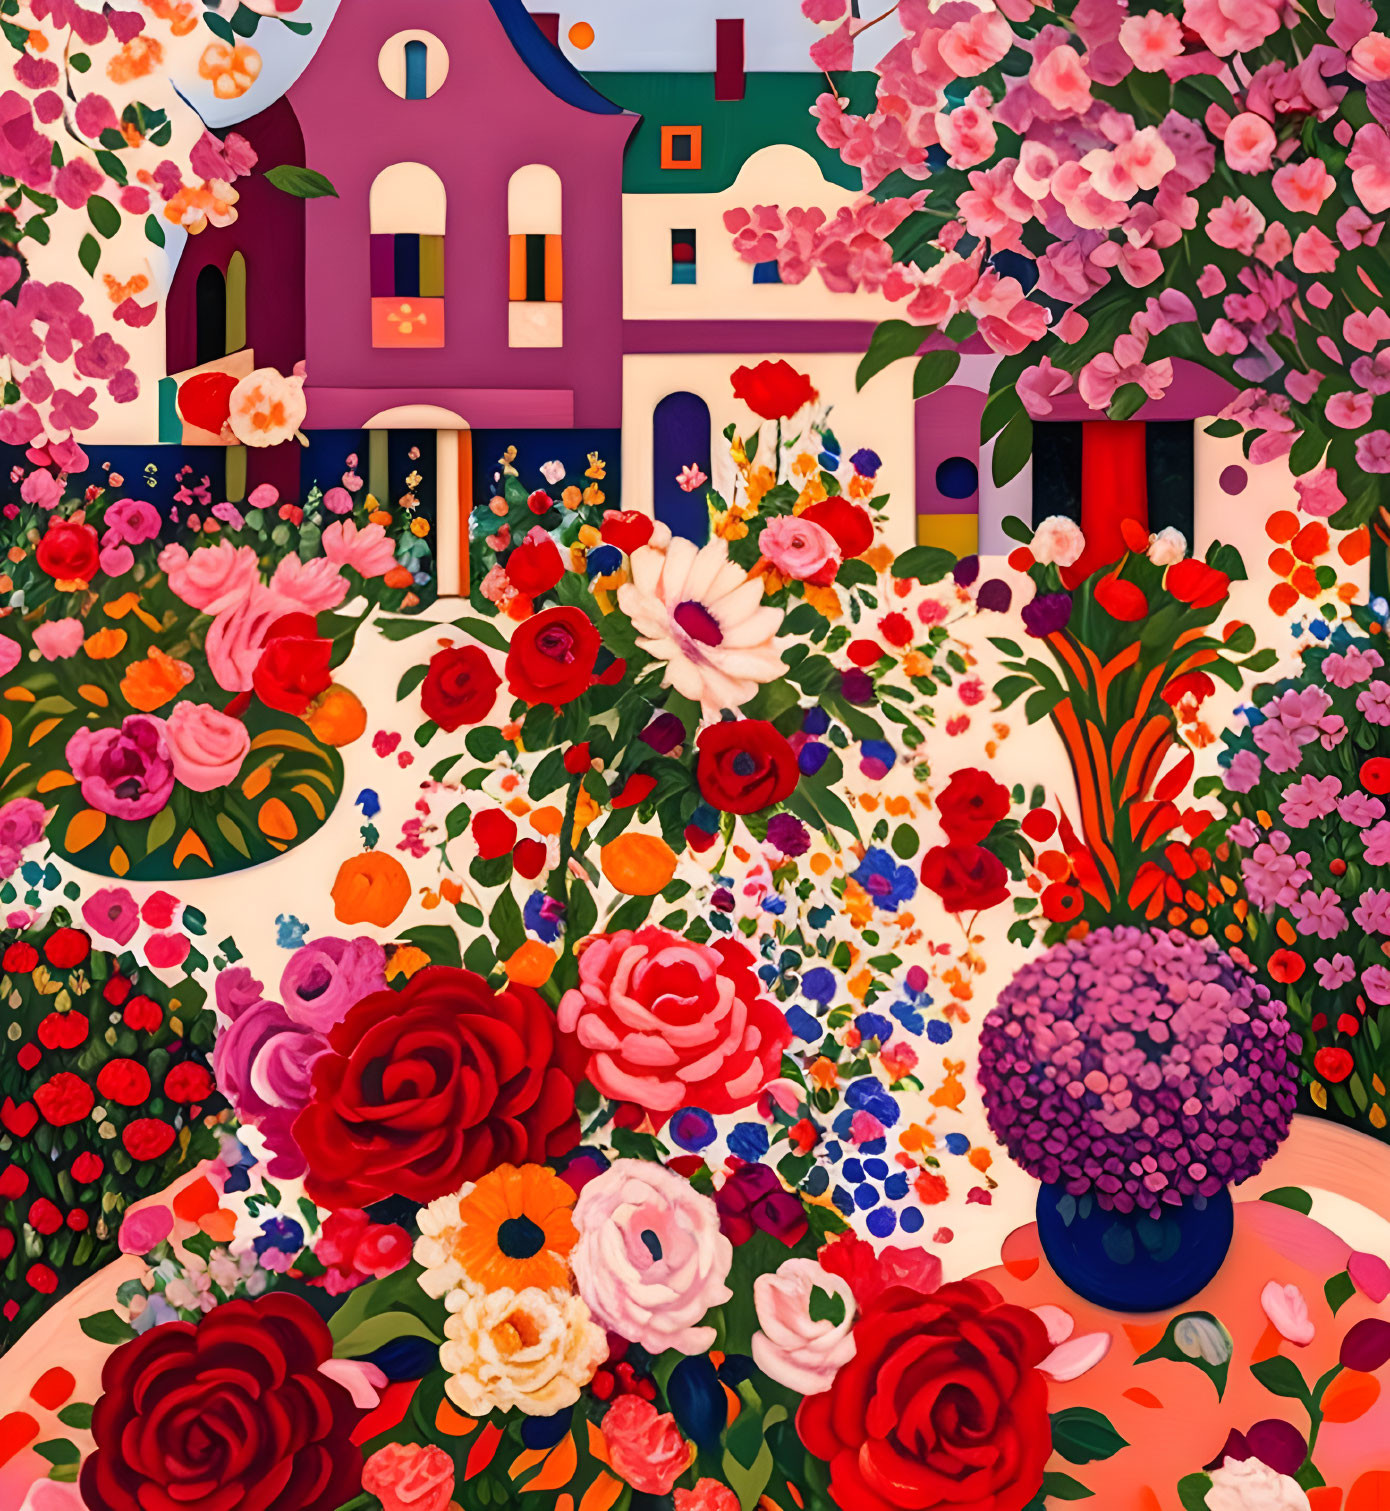 Vibrant floral garden with whimsical houses and blue vase.